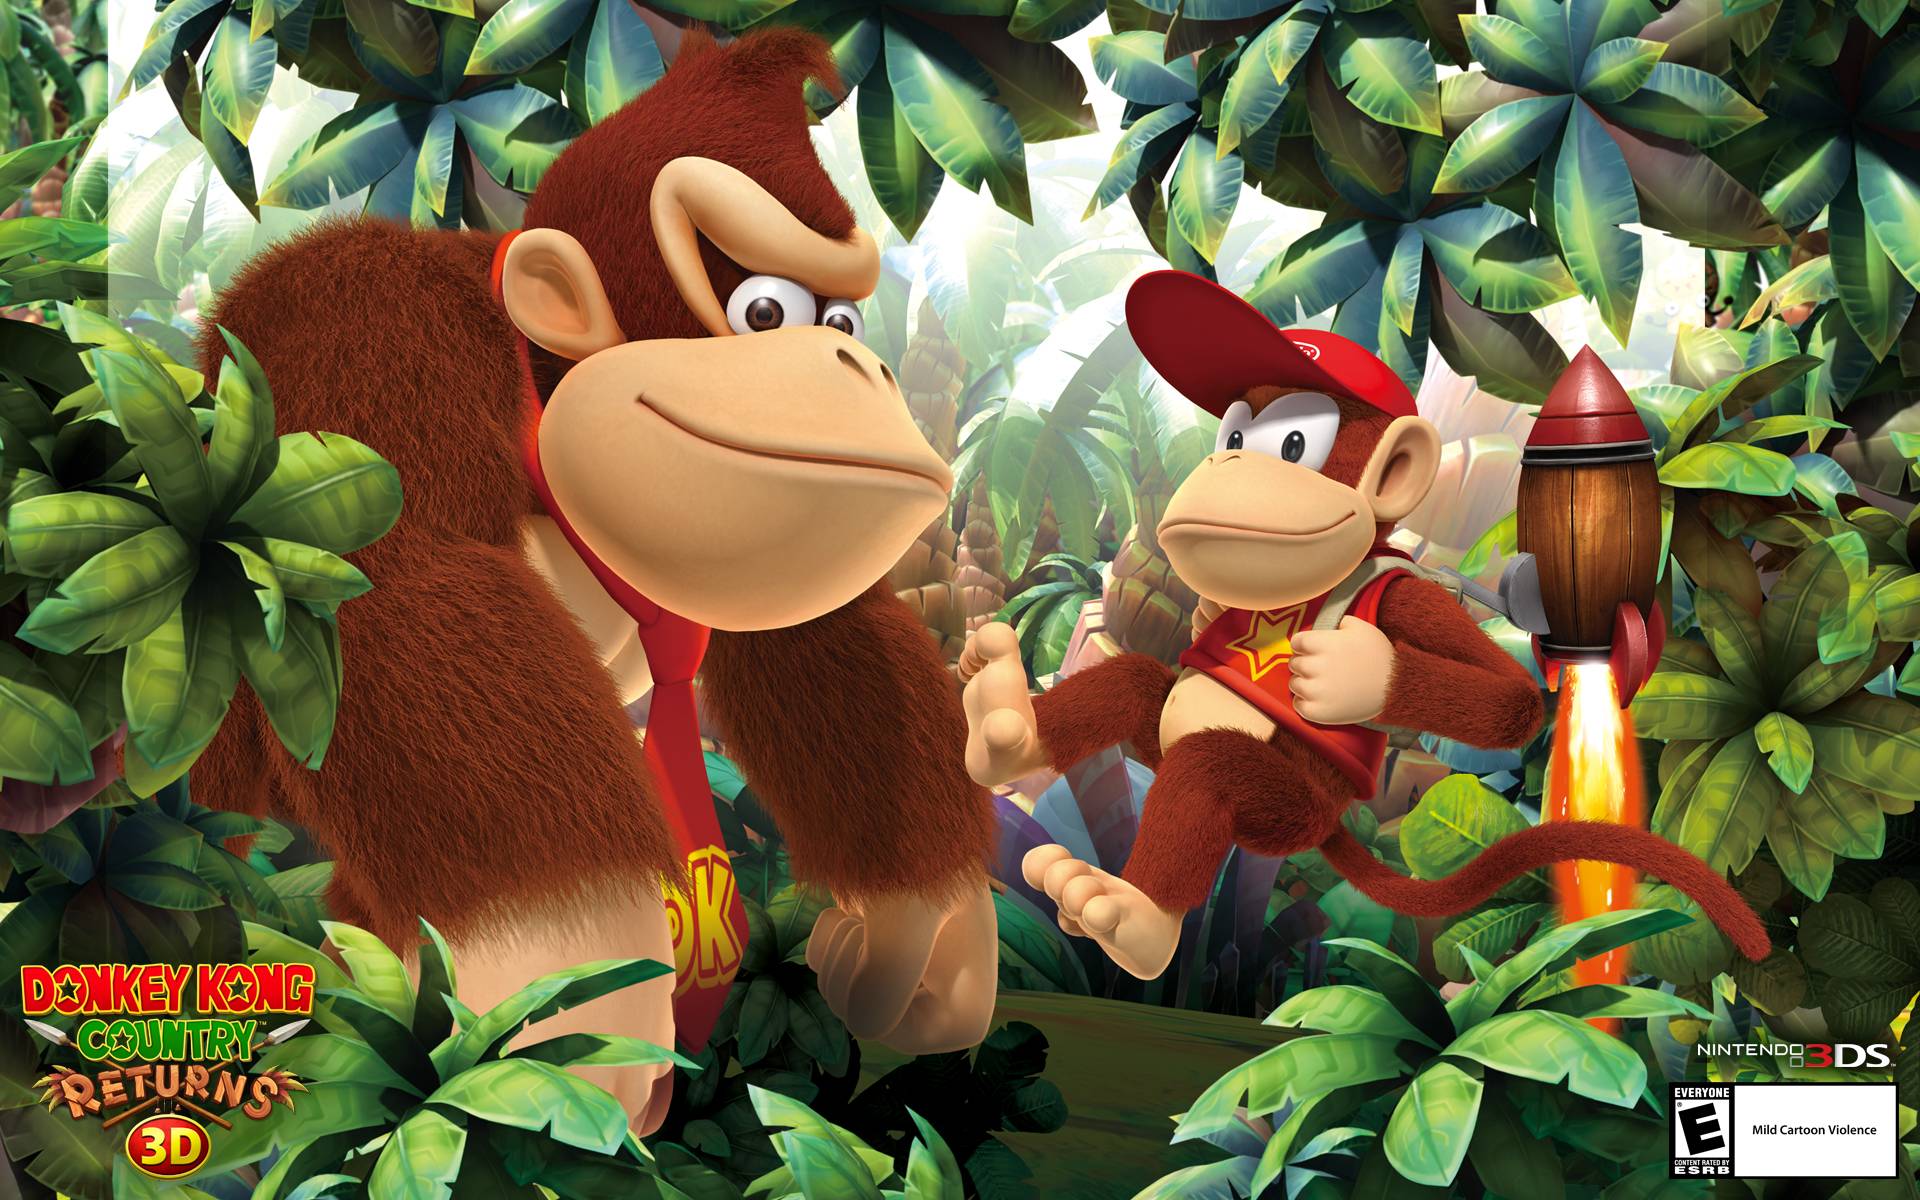 Official Site Kong Country Returns 3D for Nintendo 3DS